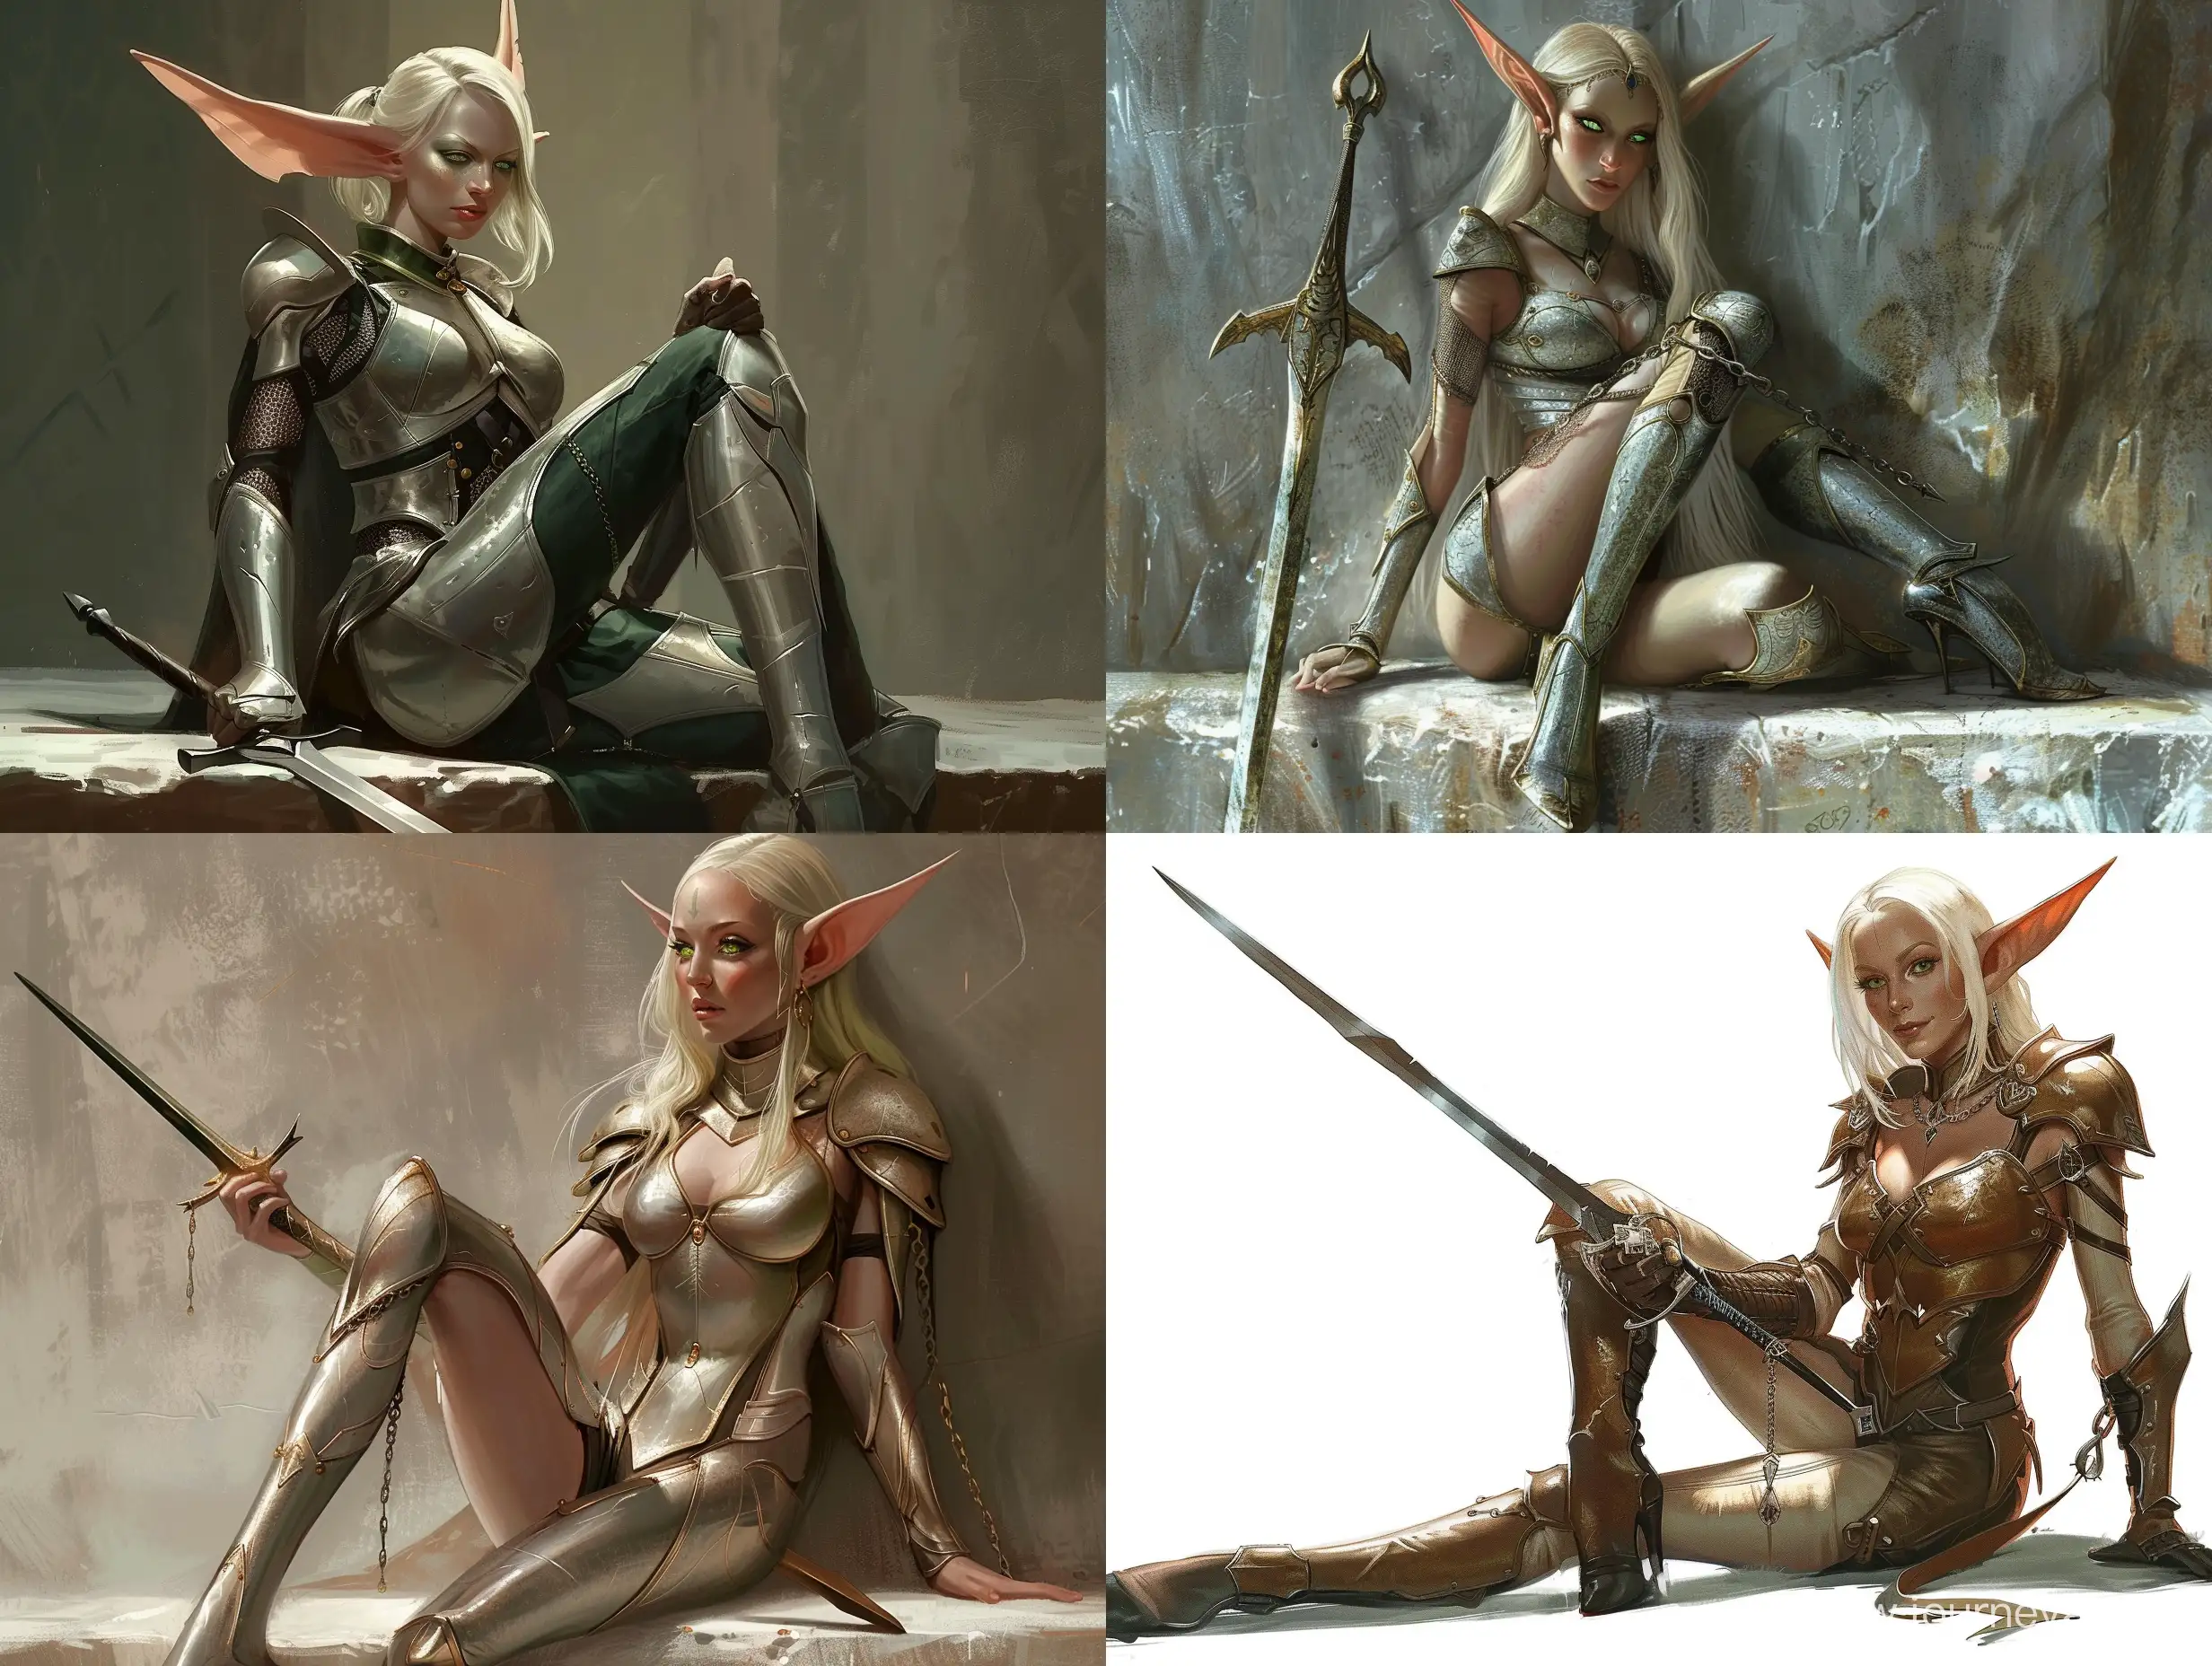 Elven-Cleric-Portrait-in-Undermountain-with-Rapier-Platinum-Blonde-Female-with-Green-Eyes-in-Relaxed-Pose